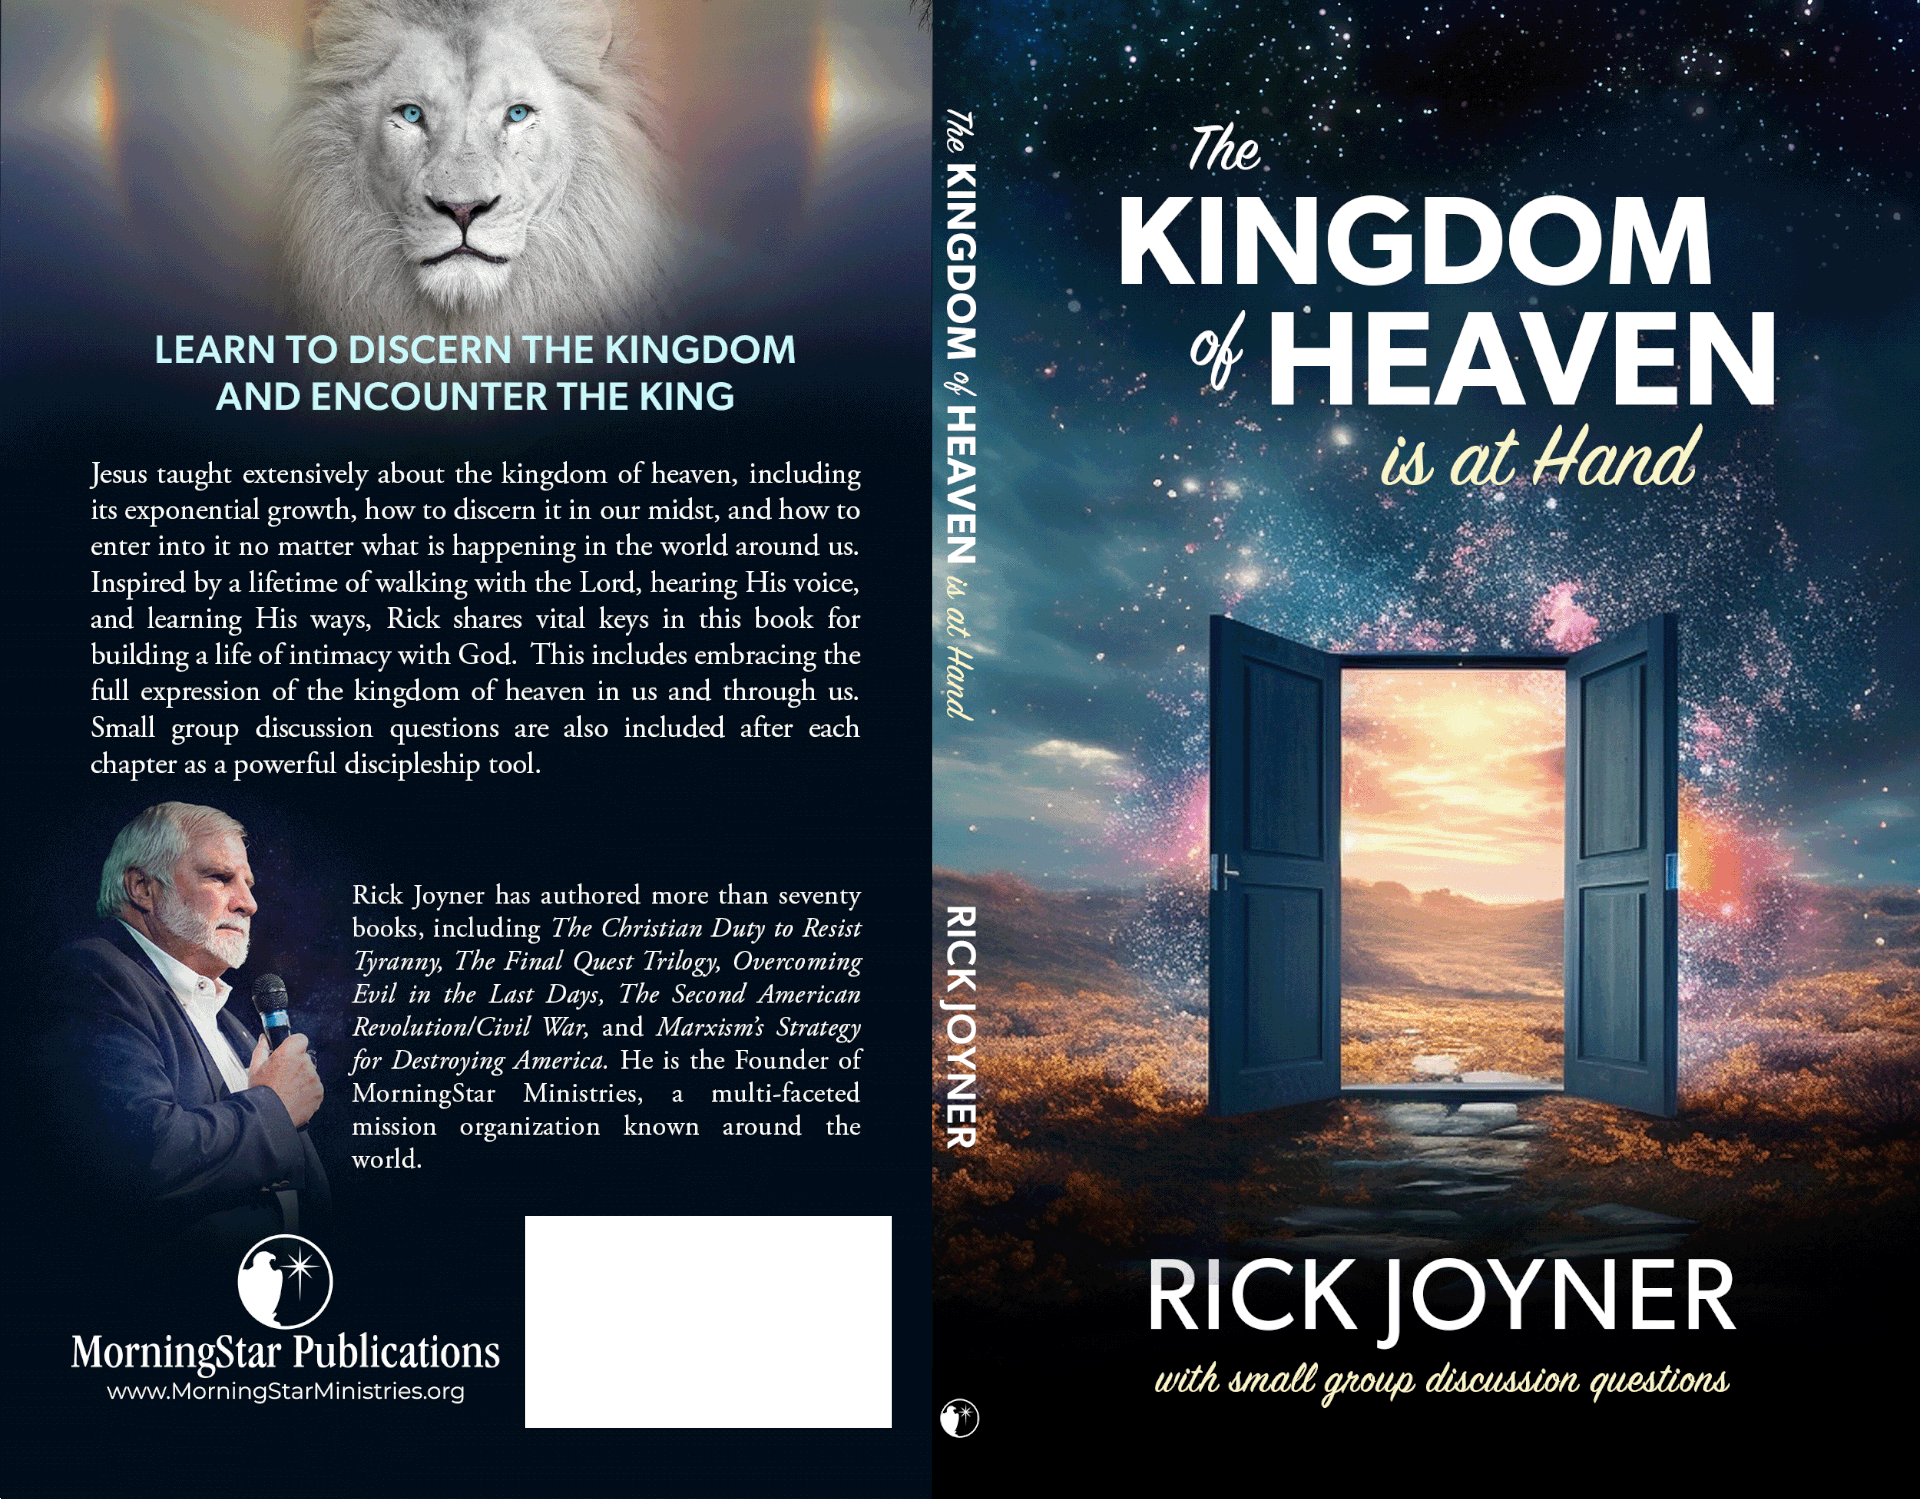 The Kingdom of Heaven is at Hand by Rick Joyner